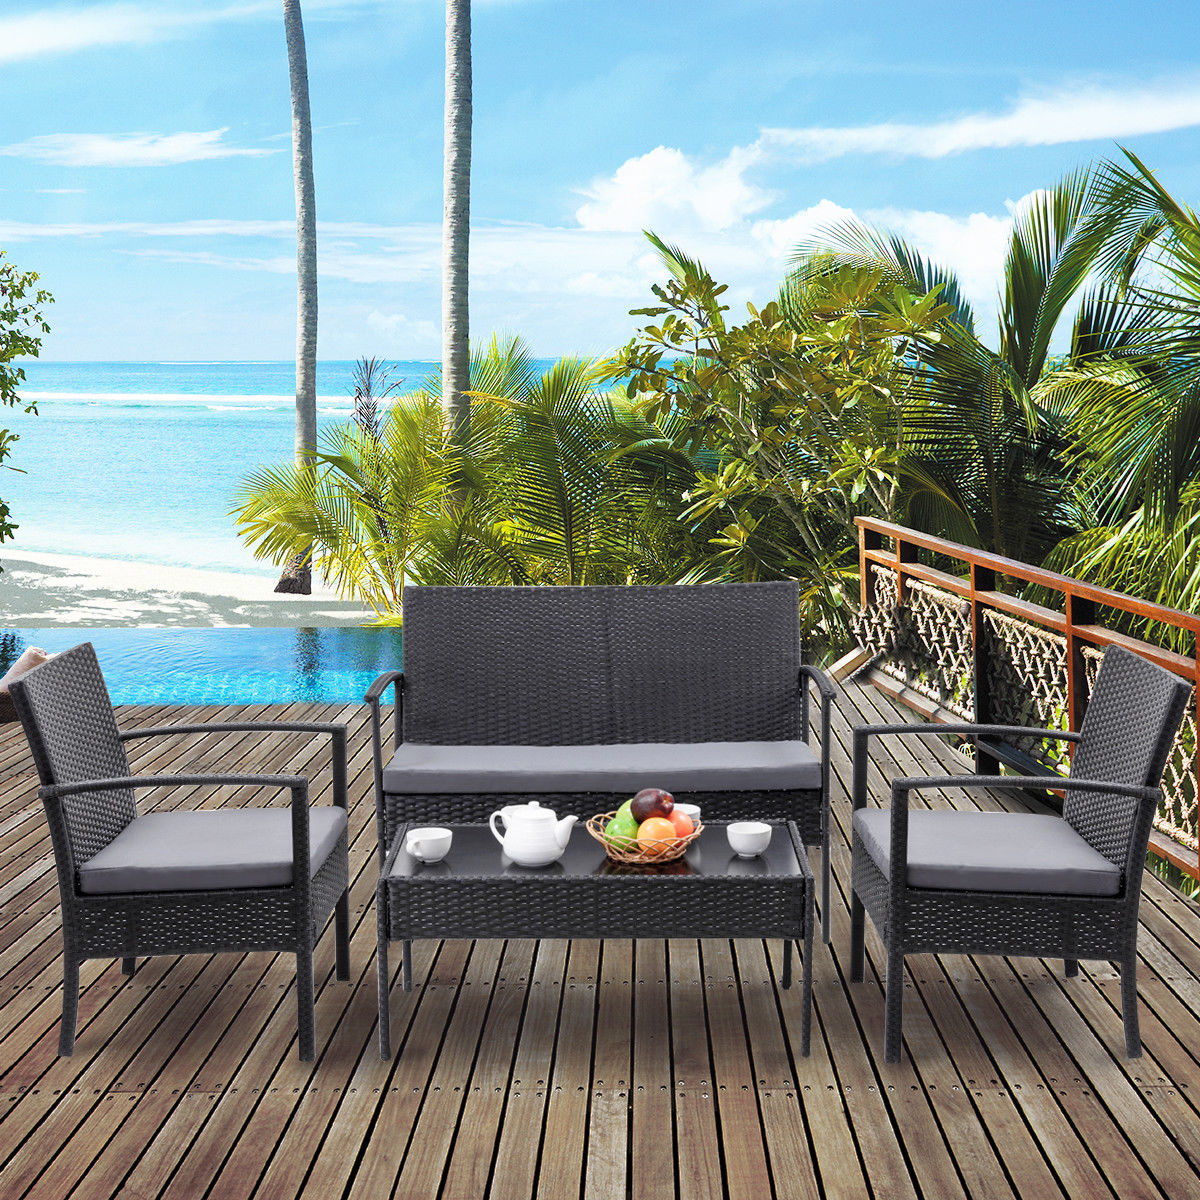 Us 15979 Costway 4 Pcs Outdoor Patio Rattan Wicker Furniture Set Table Sofa Cushioned Deck Black In Sofa Tables From Furniture On Aliexpress pertaining to dimensions 1200 X 1200